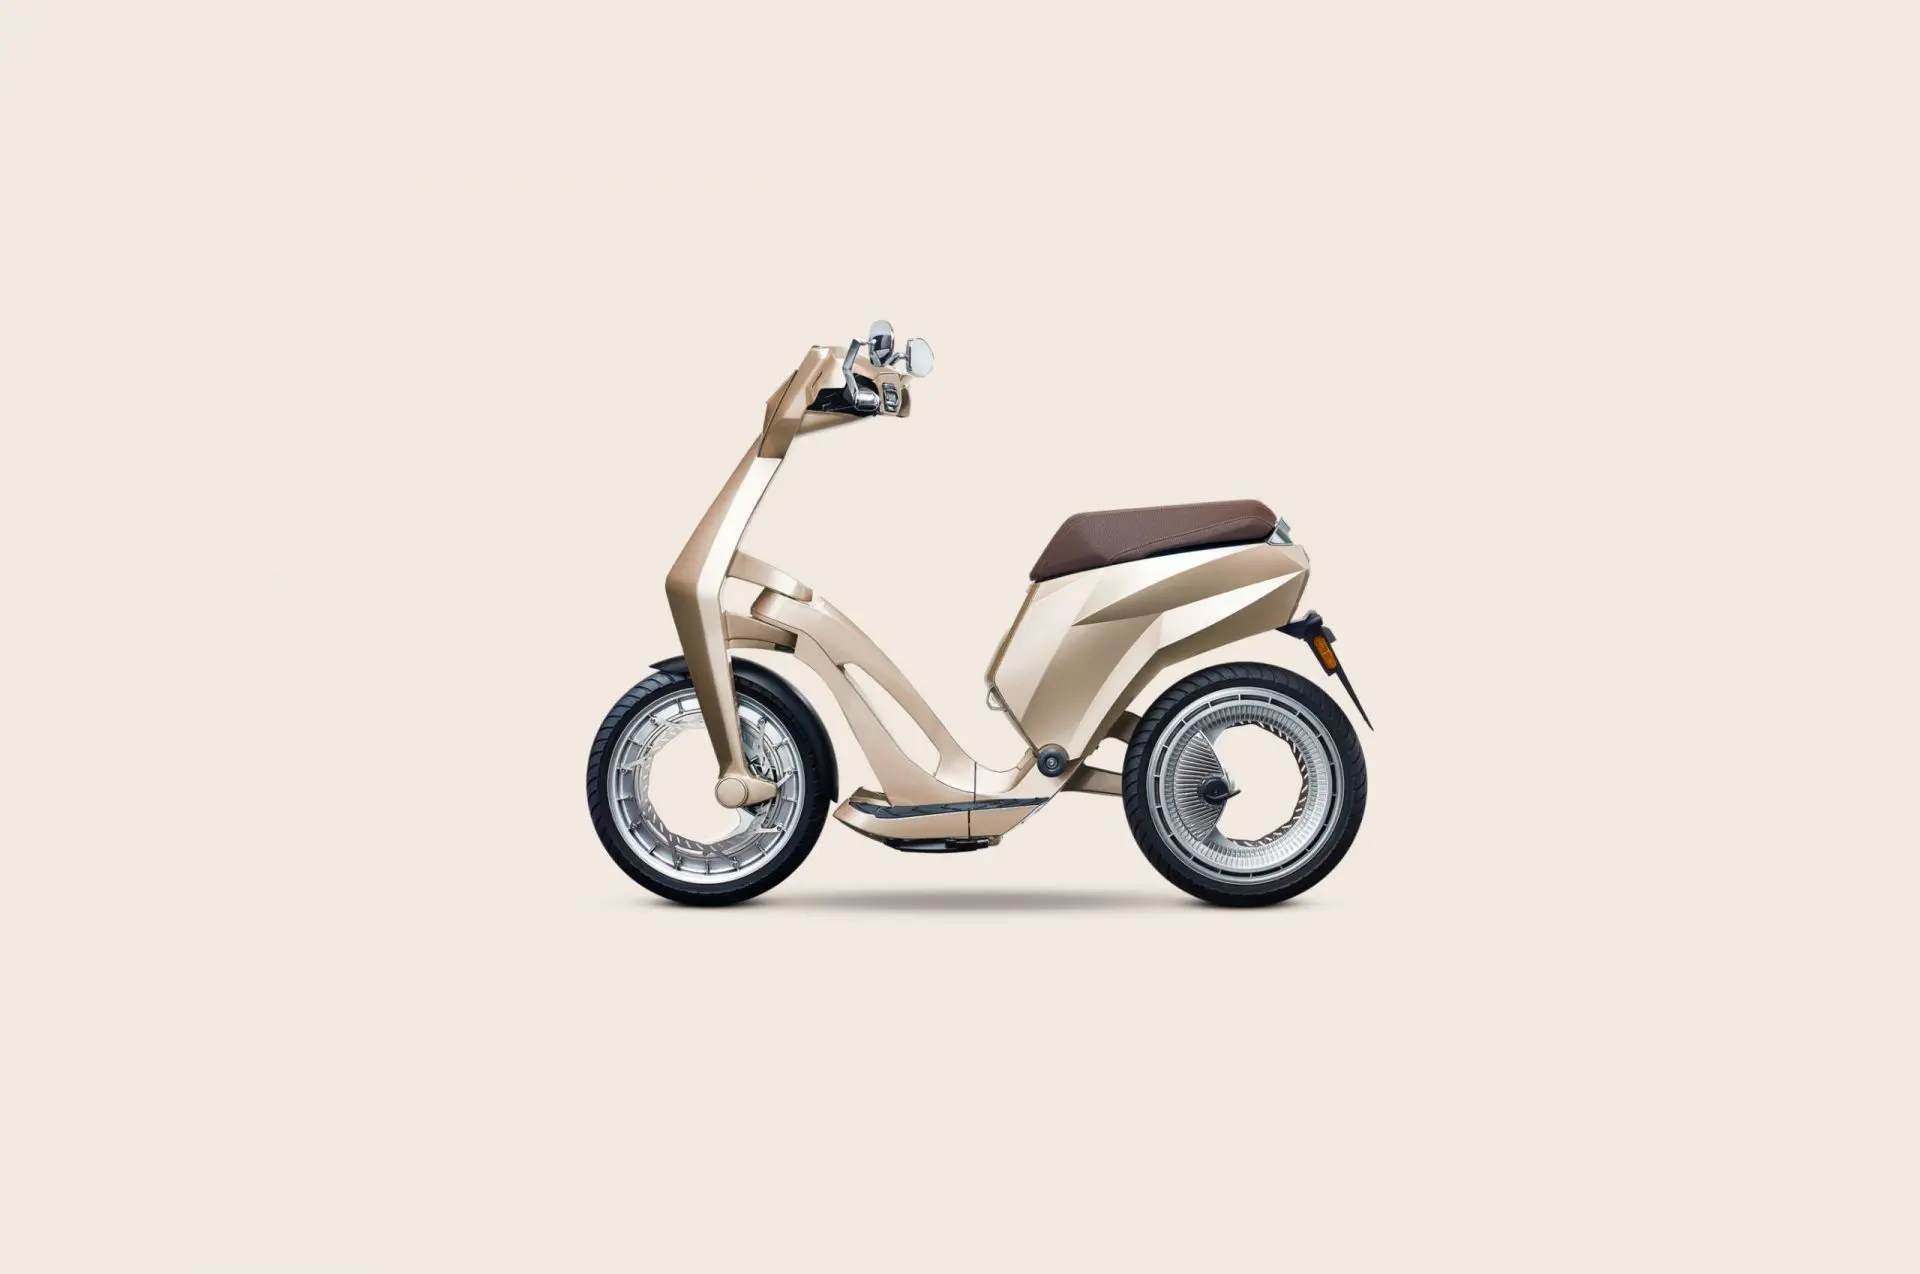 UJET electric scooter: high tech, stylish and easy to use